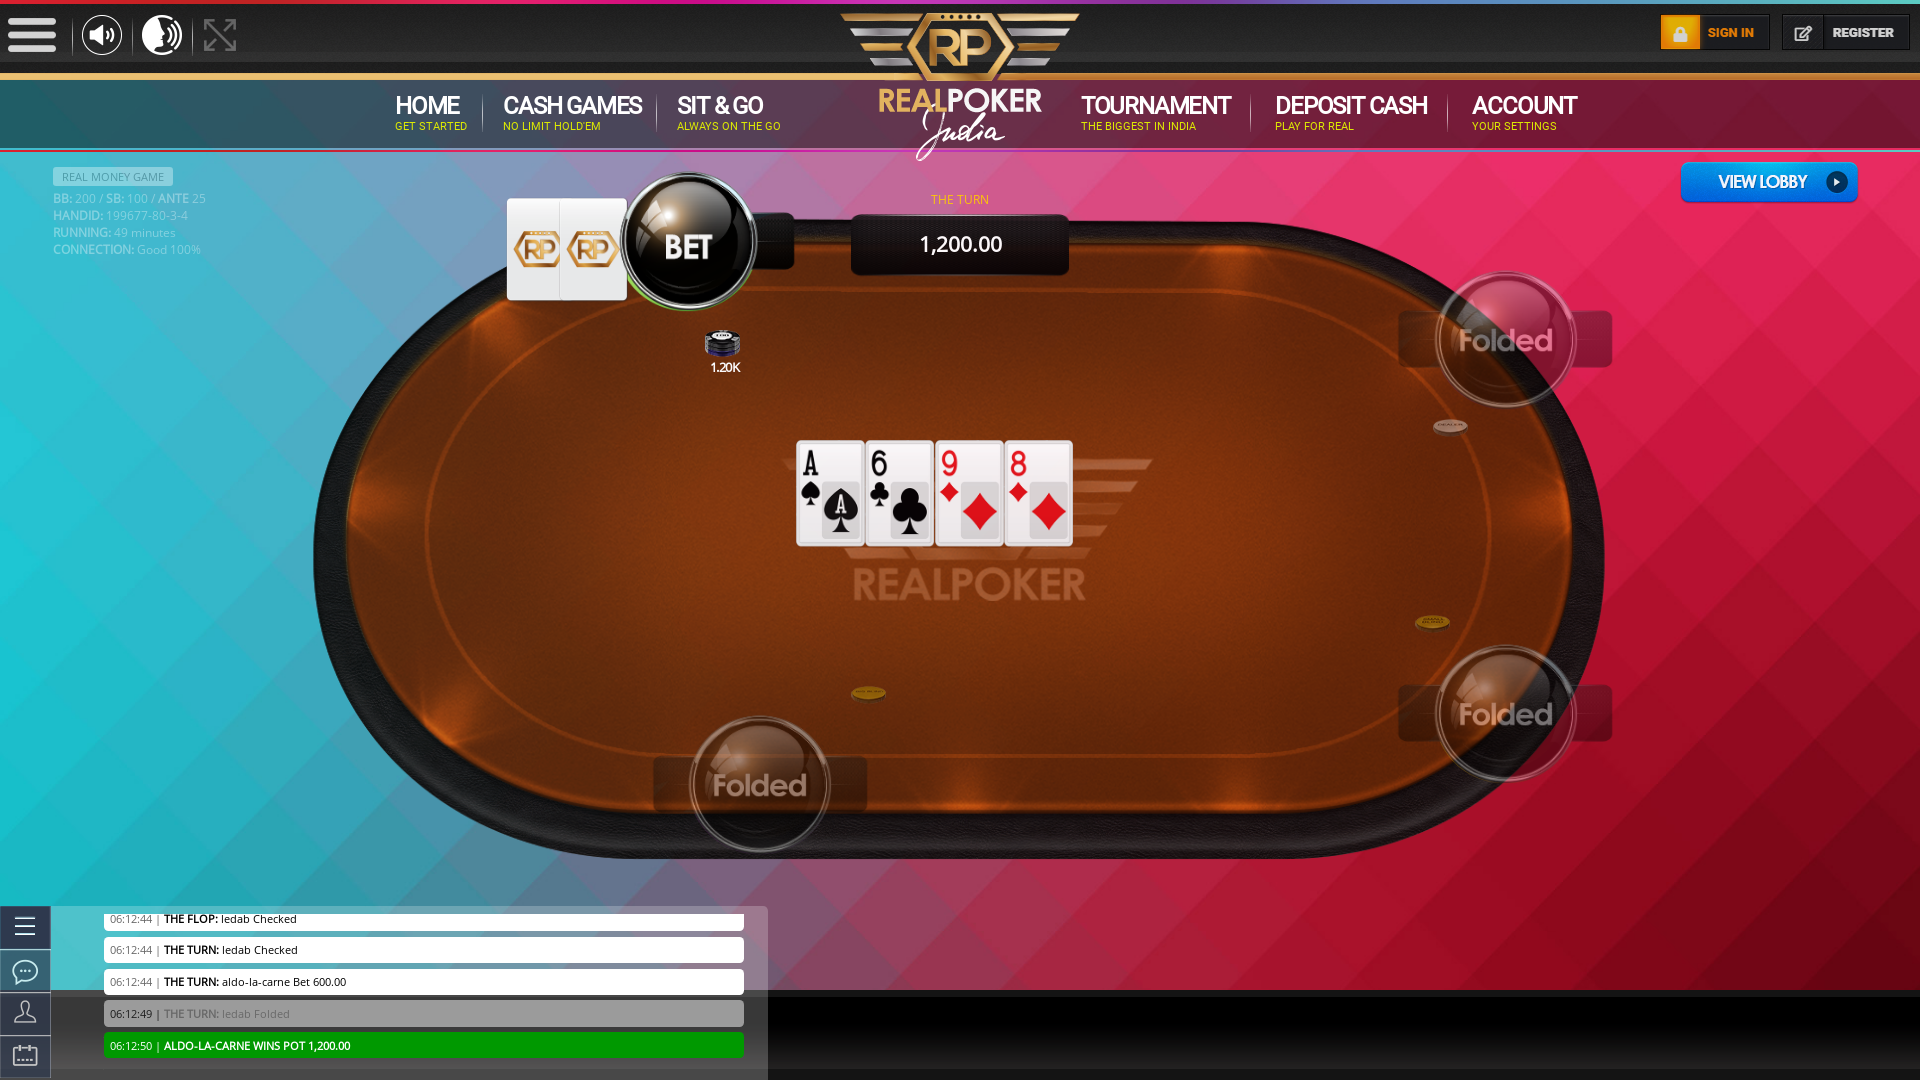 Online poker on a 10 player table in the 49th minute match up